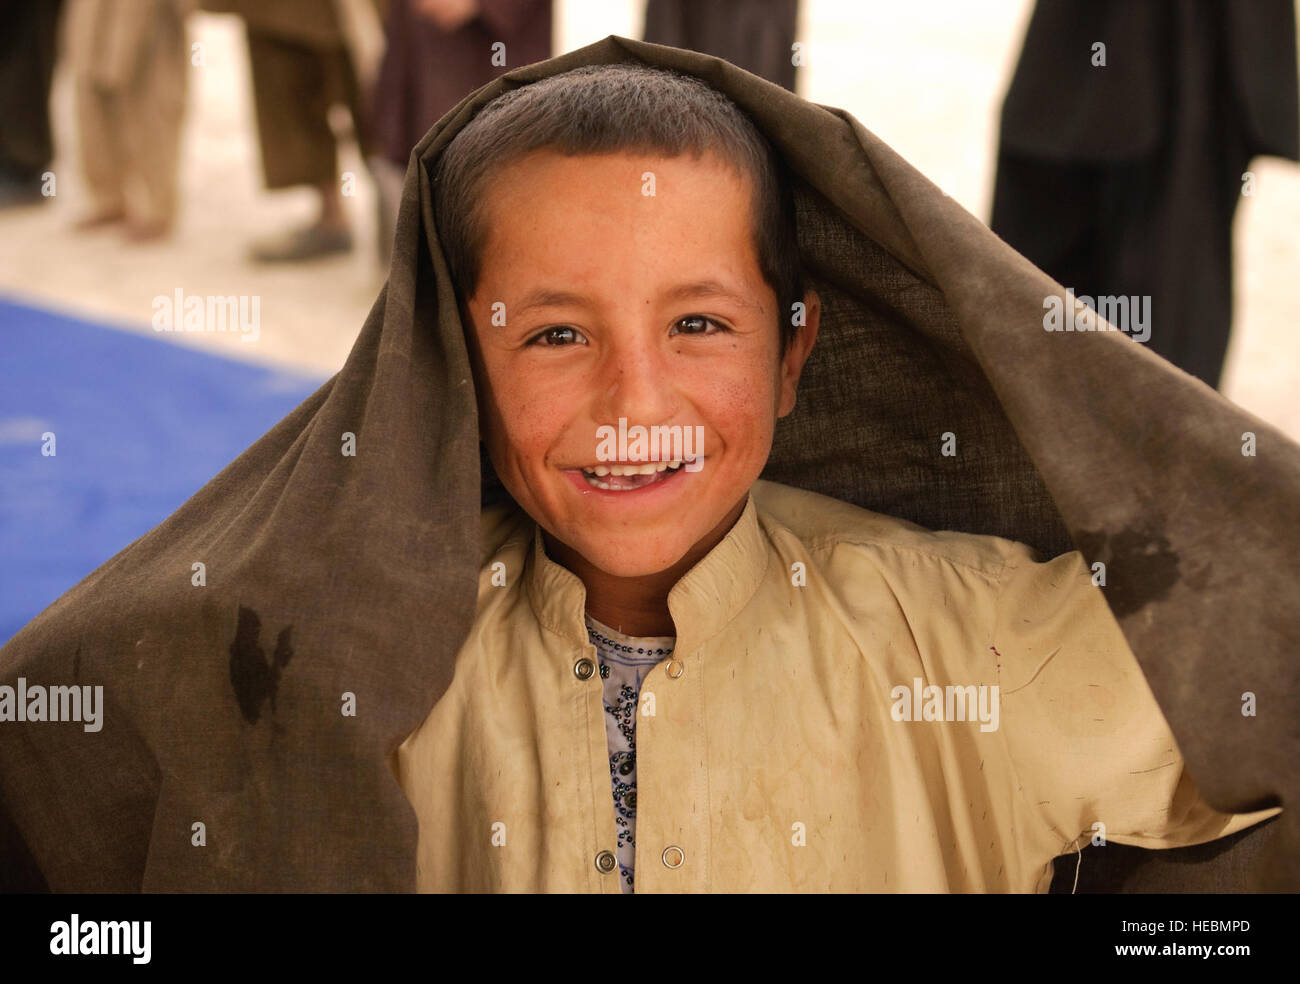 An Afghan boy poses for the camera during a shura near Forward Operating Base Bullard, Shah Joy District, Zabul province, Sept. 15, 2010. Shah Joy District Chief Abdul Qayum spoke to elders about the upcoming provincial parliamentary elections during the shura. Stock Photo